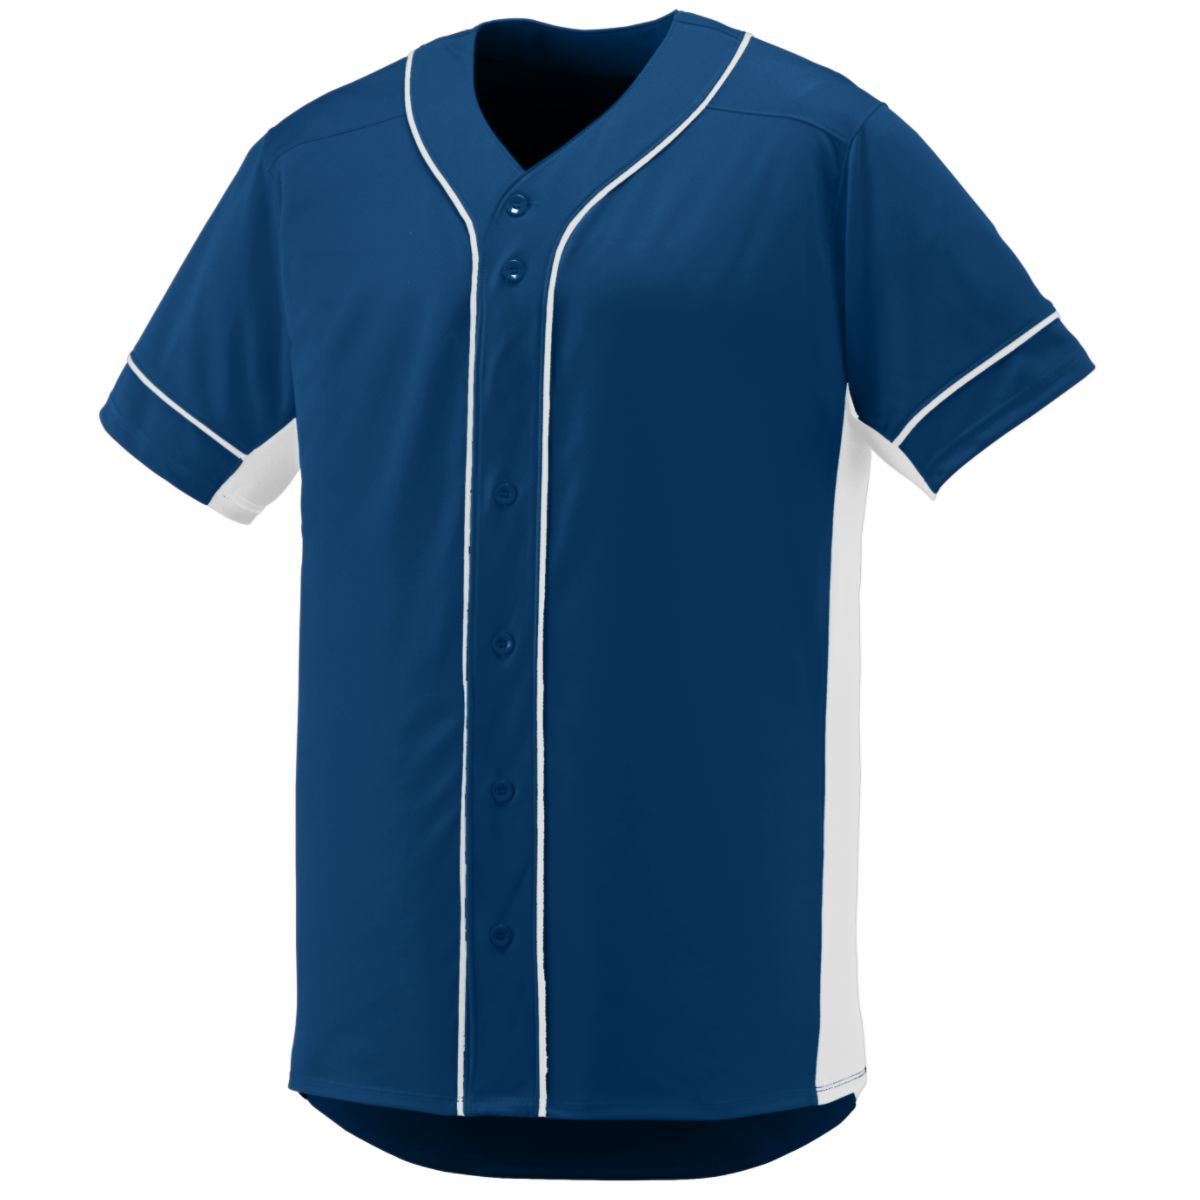 Augusta Sportswear Youth Slugger Jersey in Navy/White  -Part of the Youth, Youth-Jersey, Augusta-Products, Baseball, Shirts, All-Sports, All-Sports-1 product lines at KanaleyCreations.com